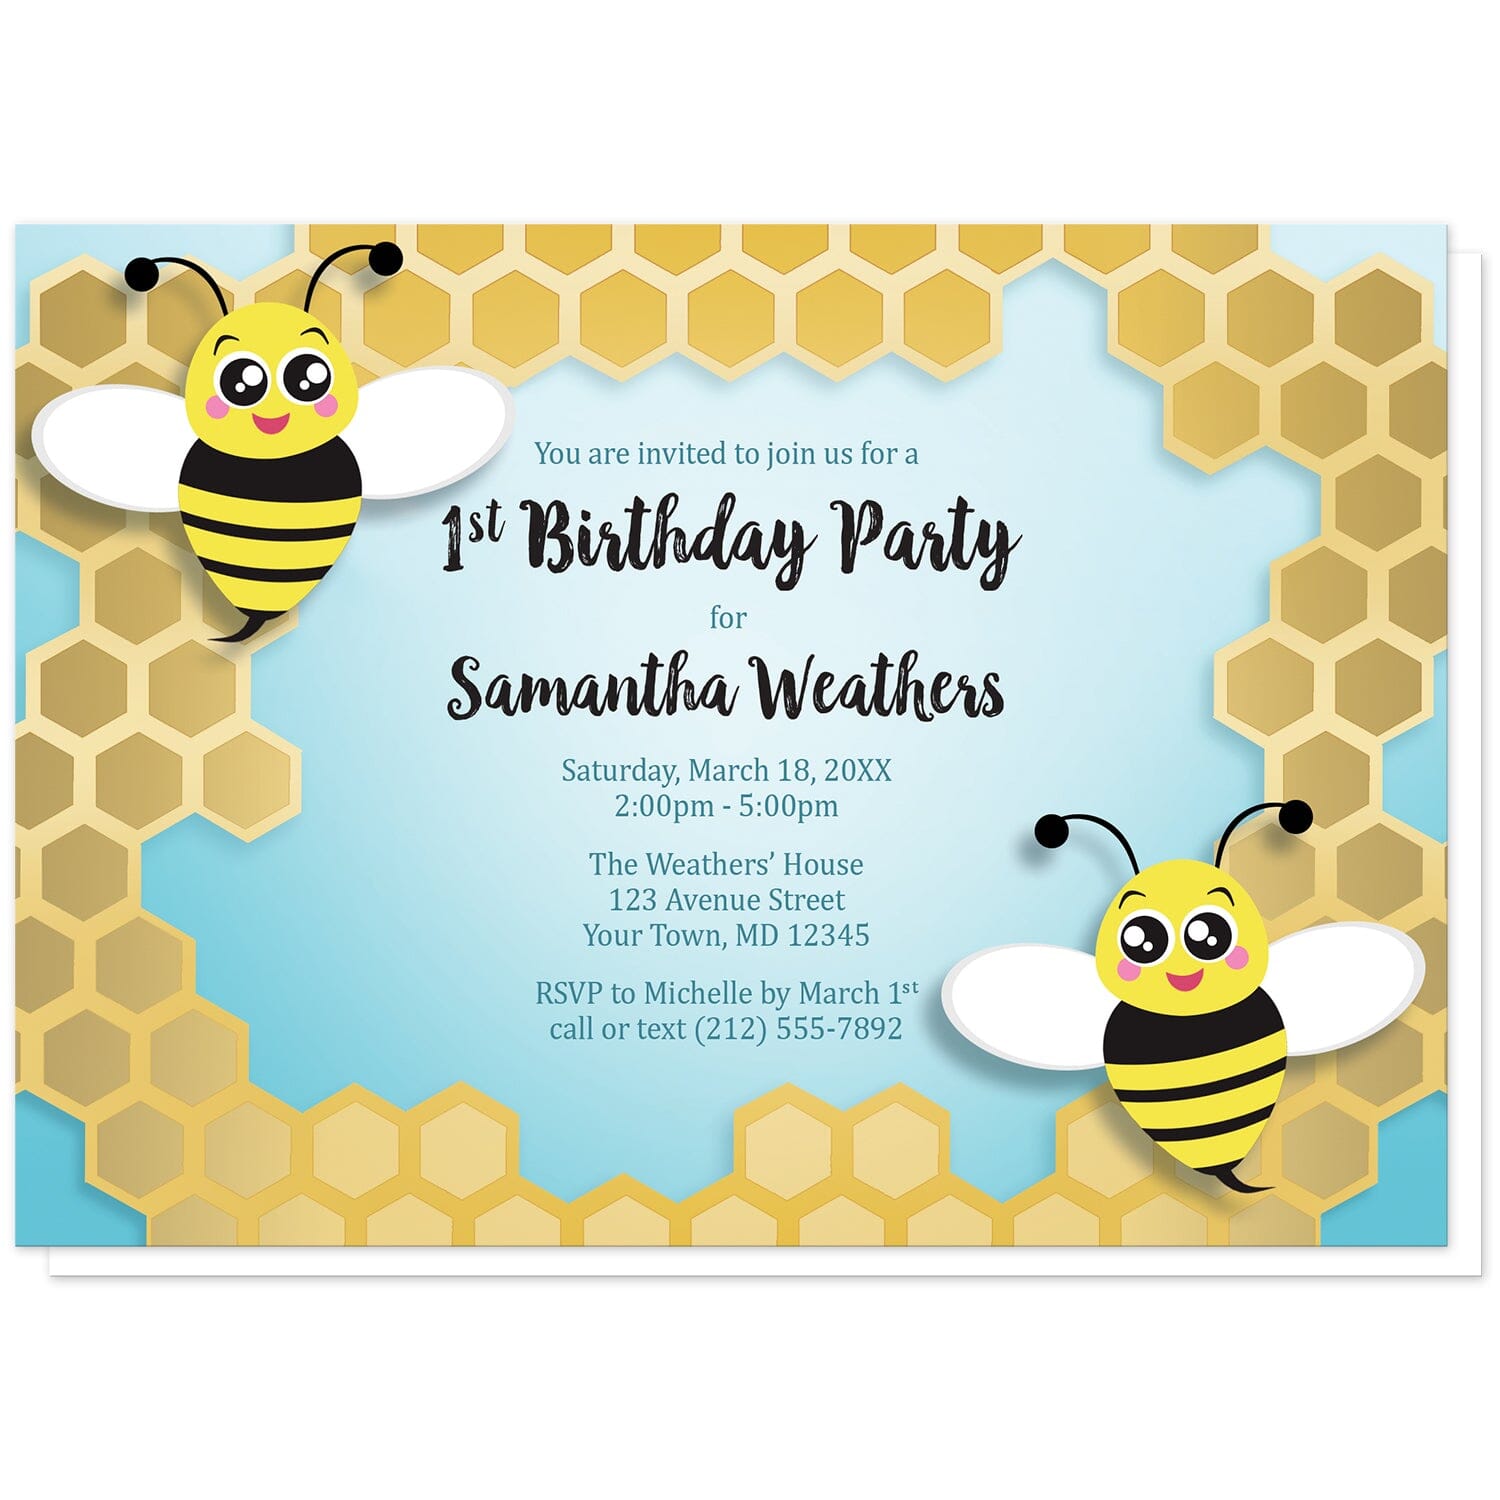 Bumble Bee Party Ideas  Bee party, Bee birthday invitations, Bee party  decorations